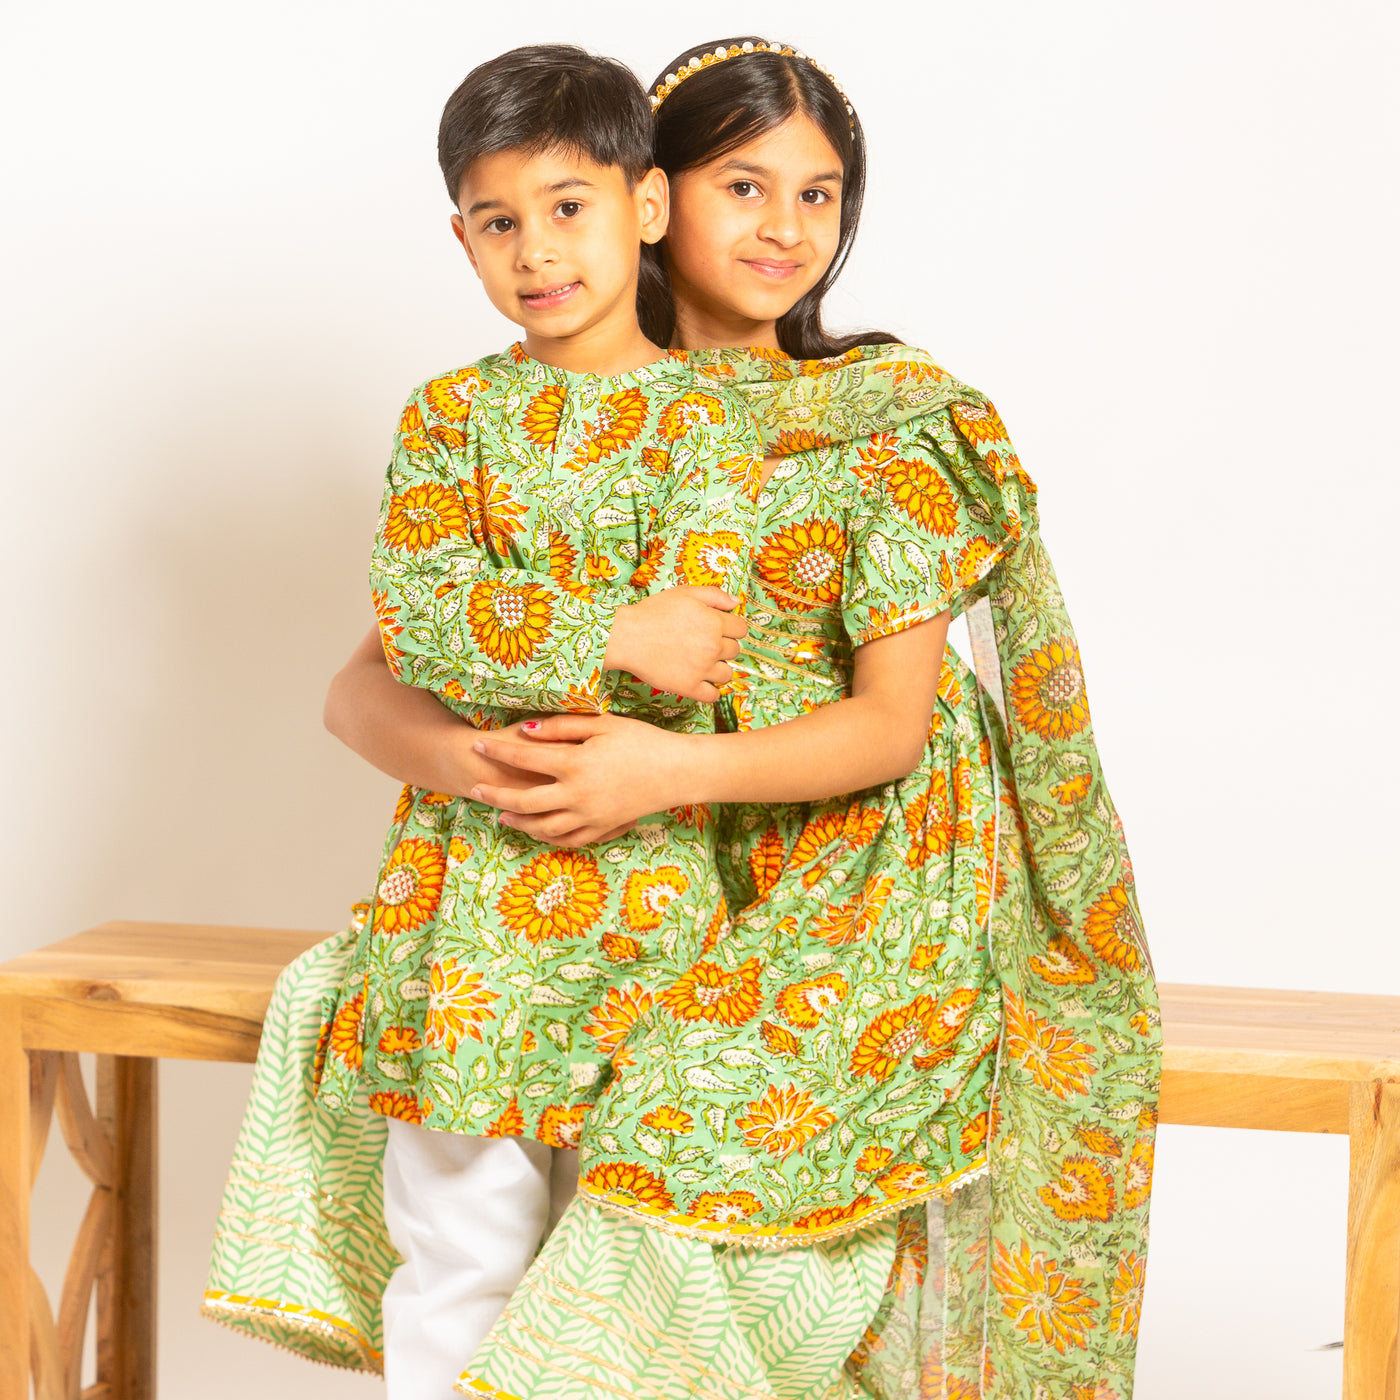 Sibling Set - Green Floral Ensemble for Girls and Boys